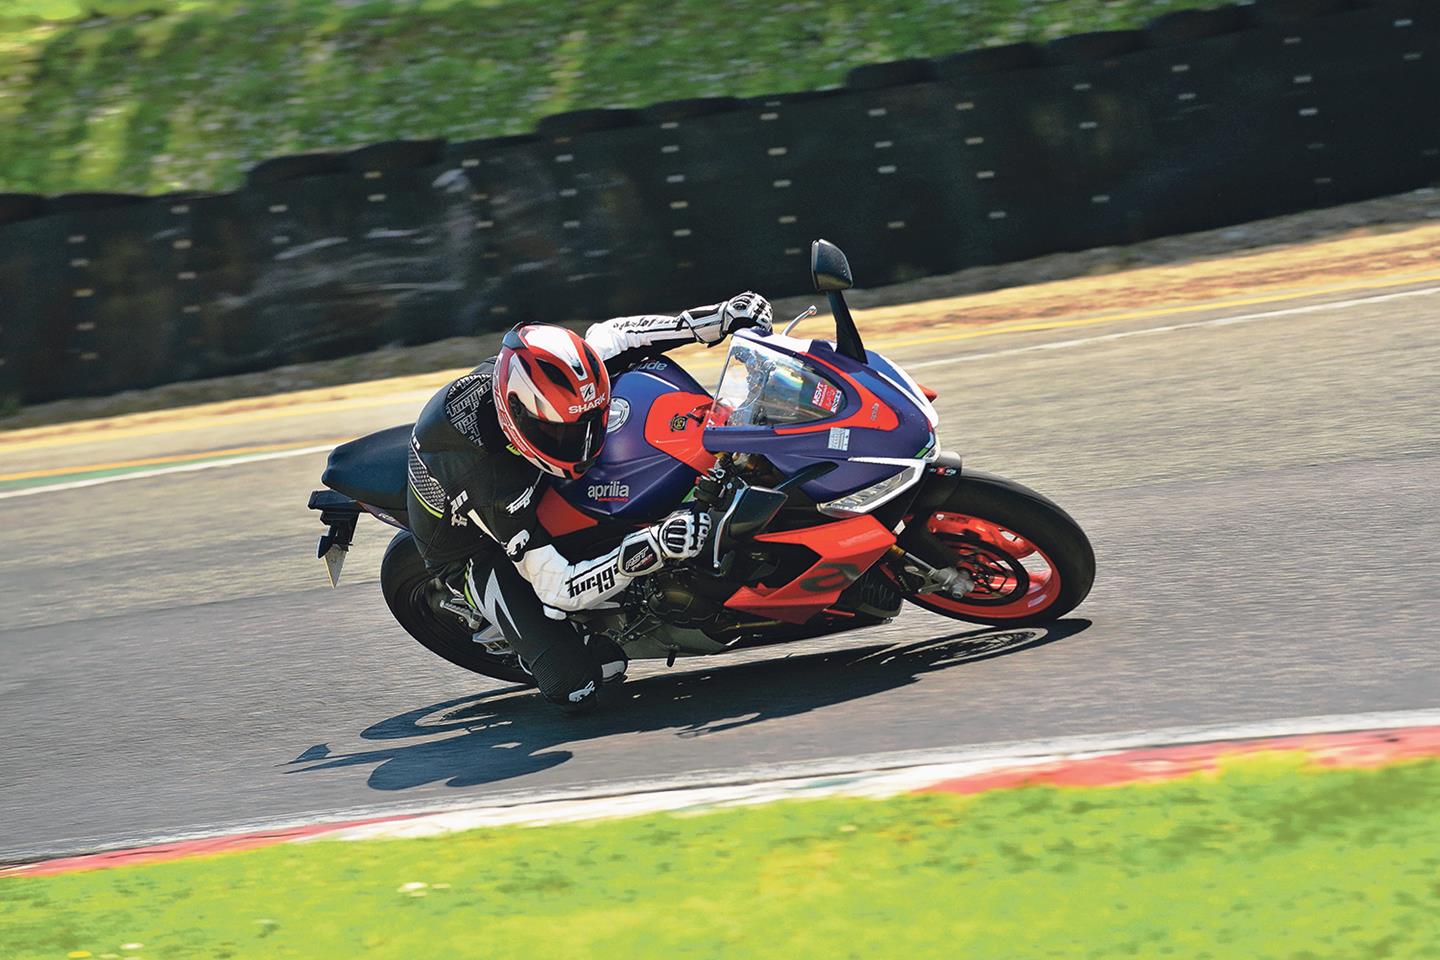 MCN Fleet: Dan looks back fondly at a (largely) brilliant year 